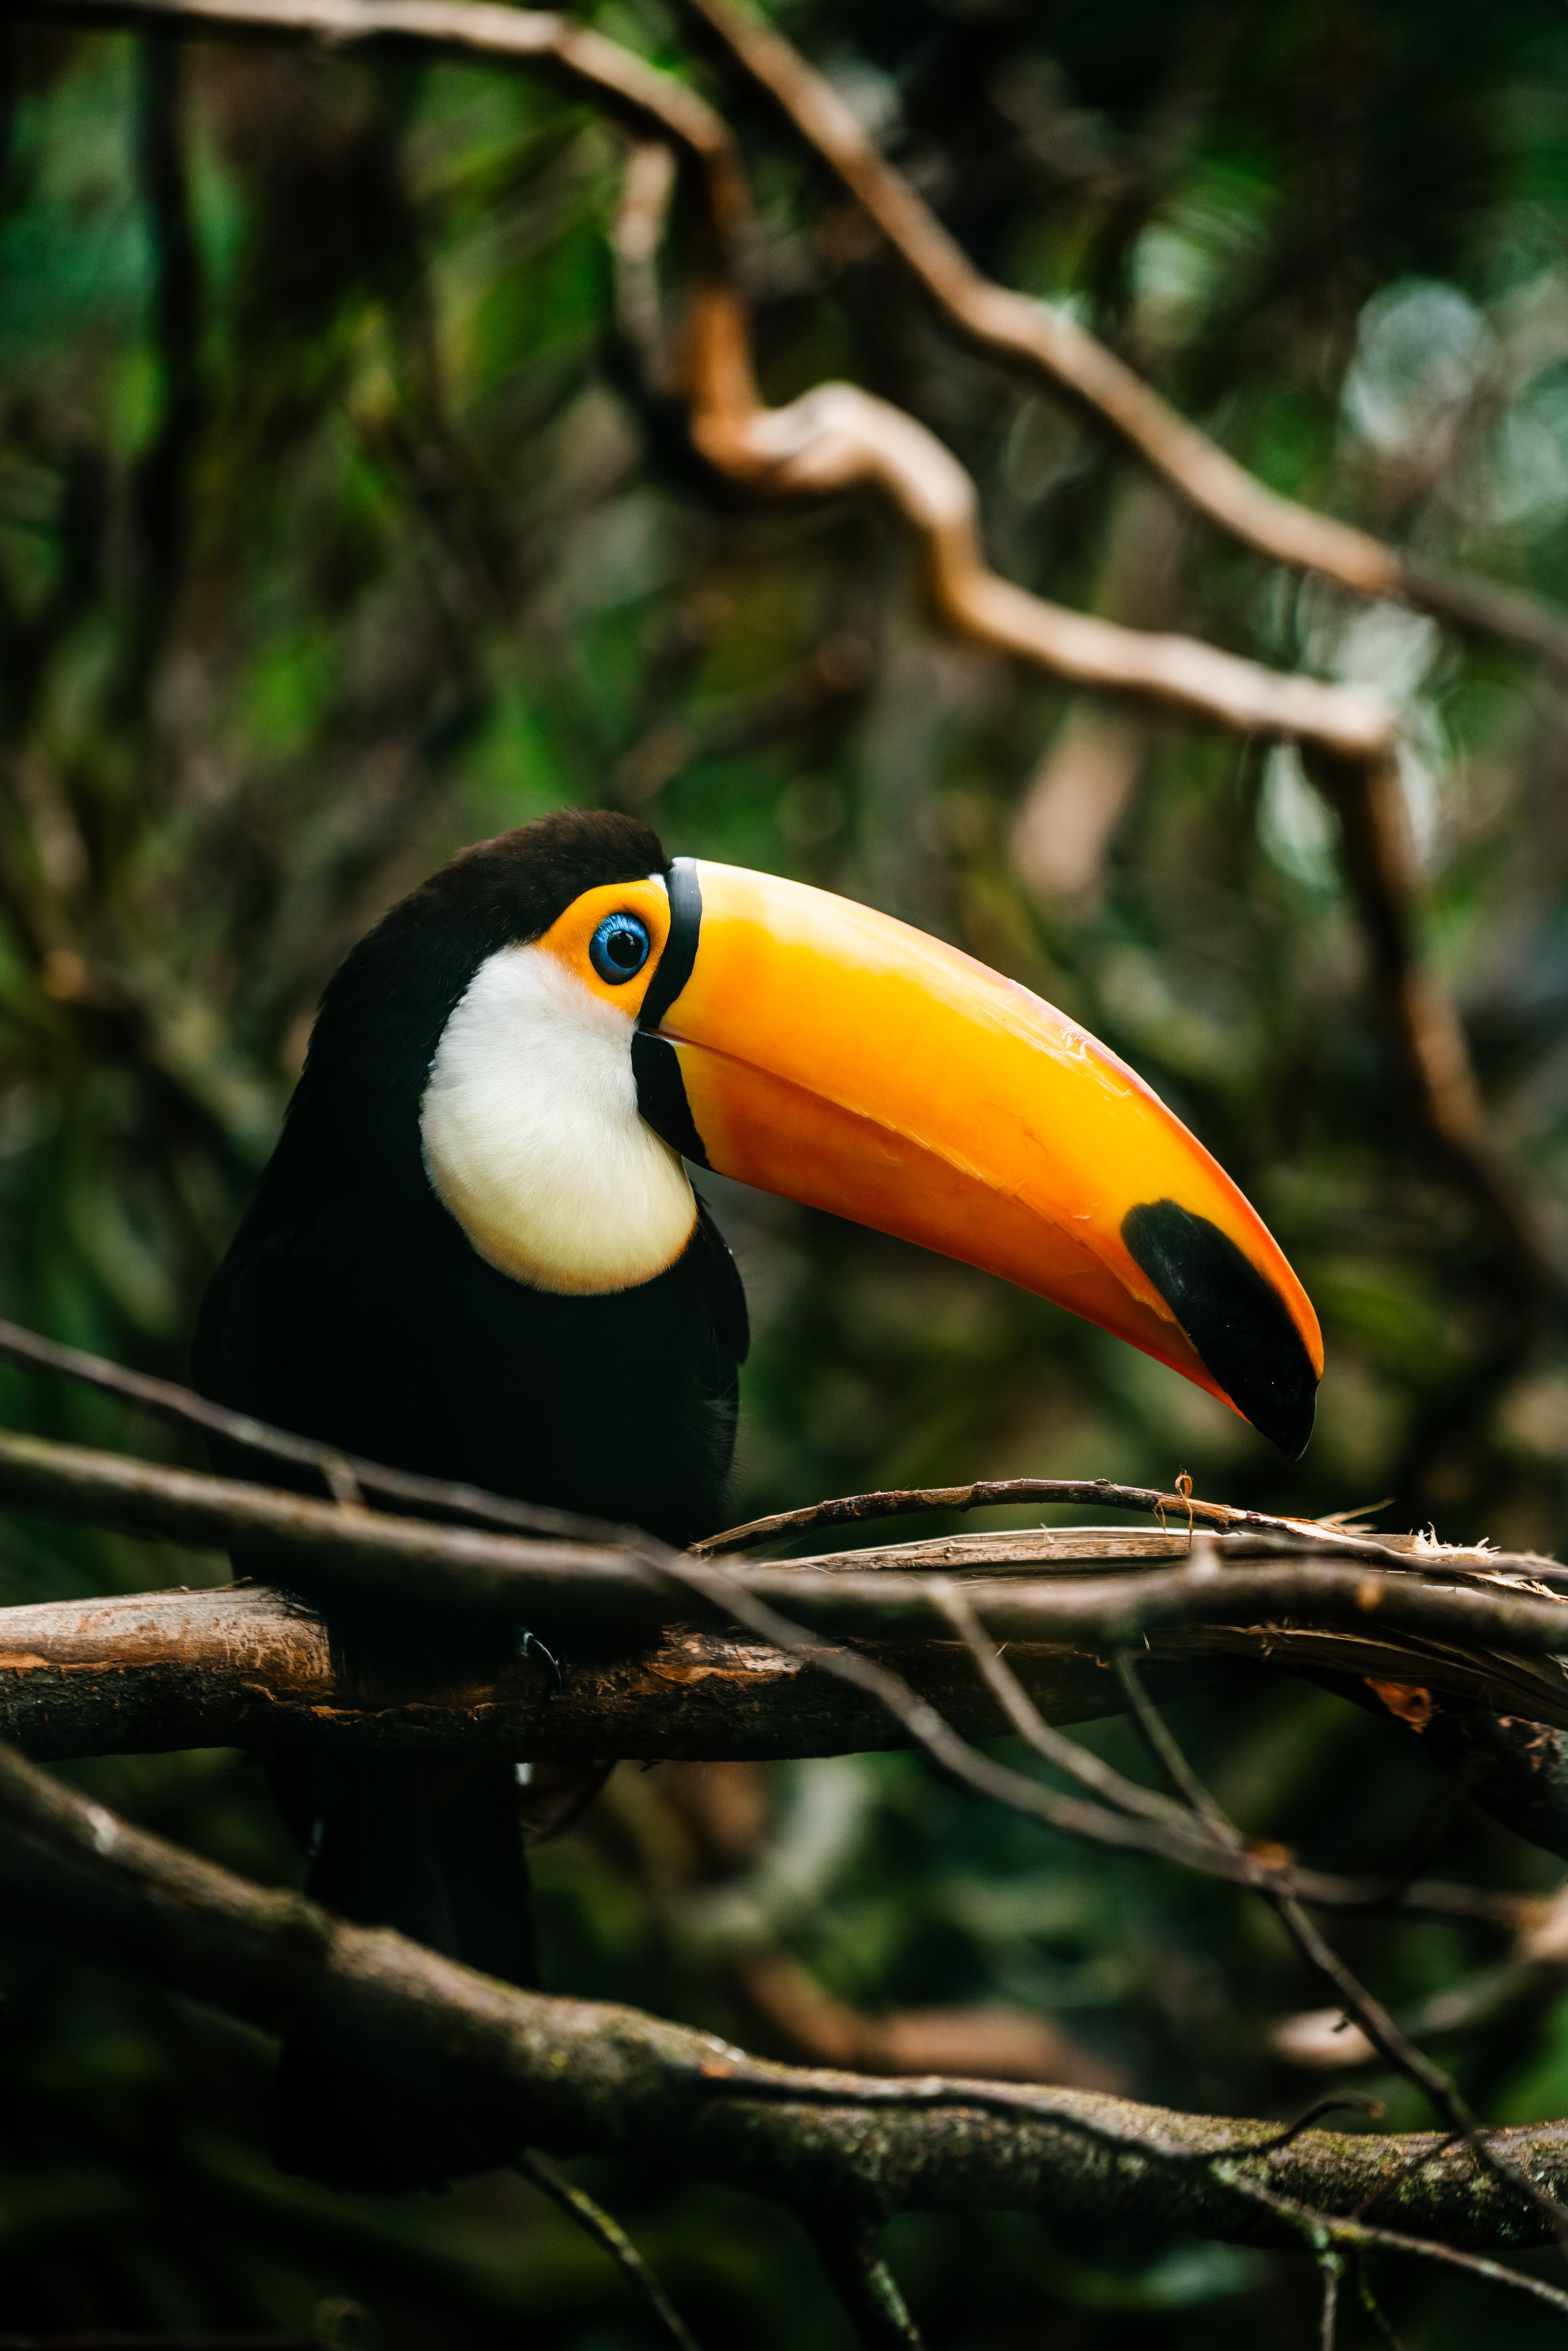 Popular Toucan Image for Phone